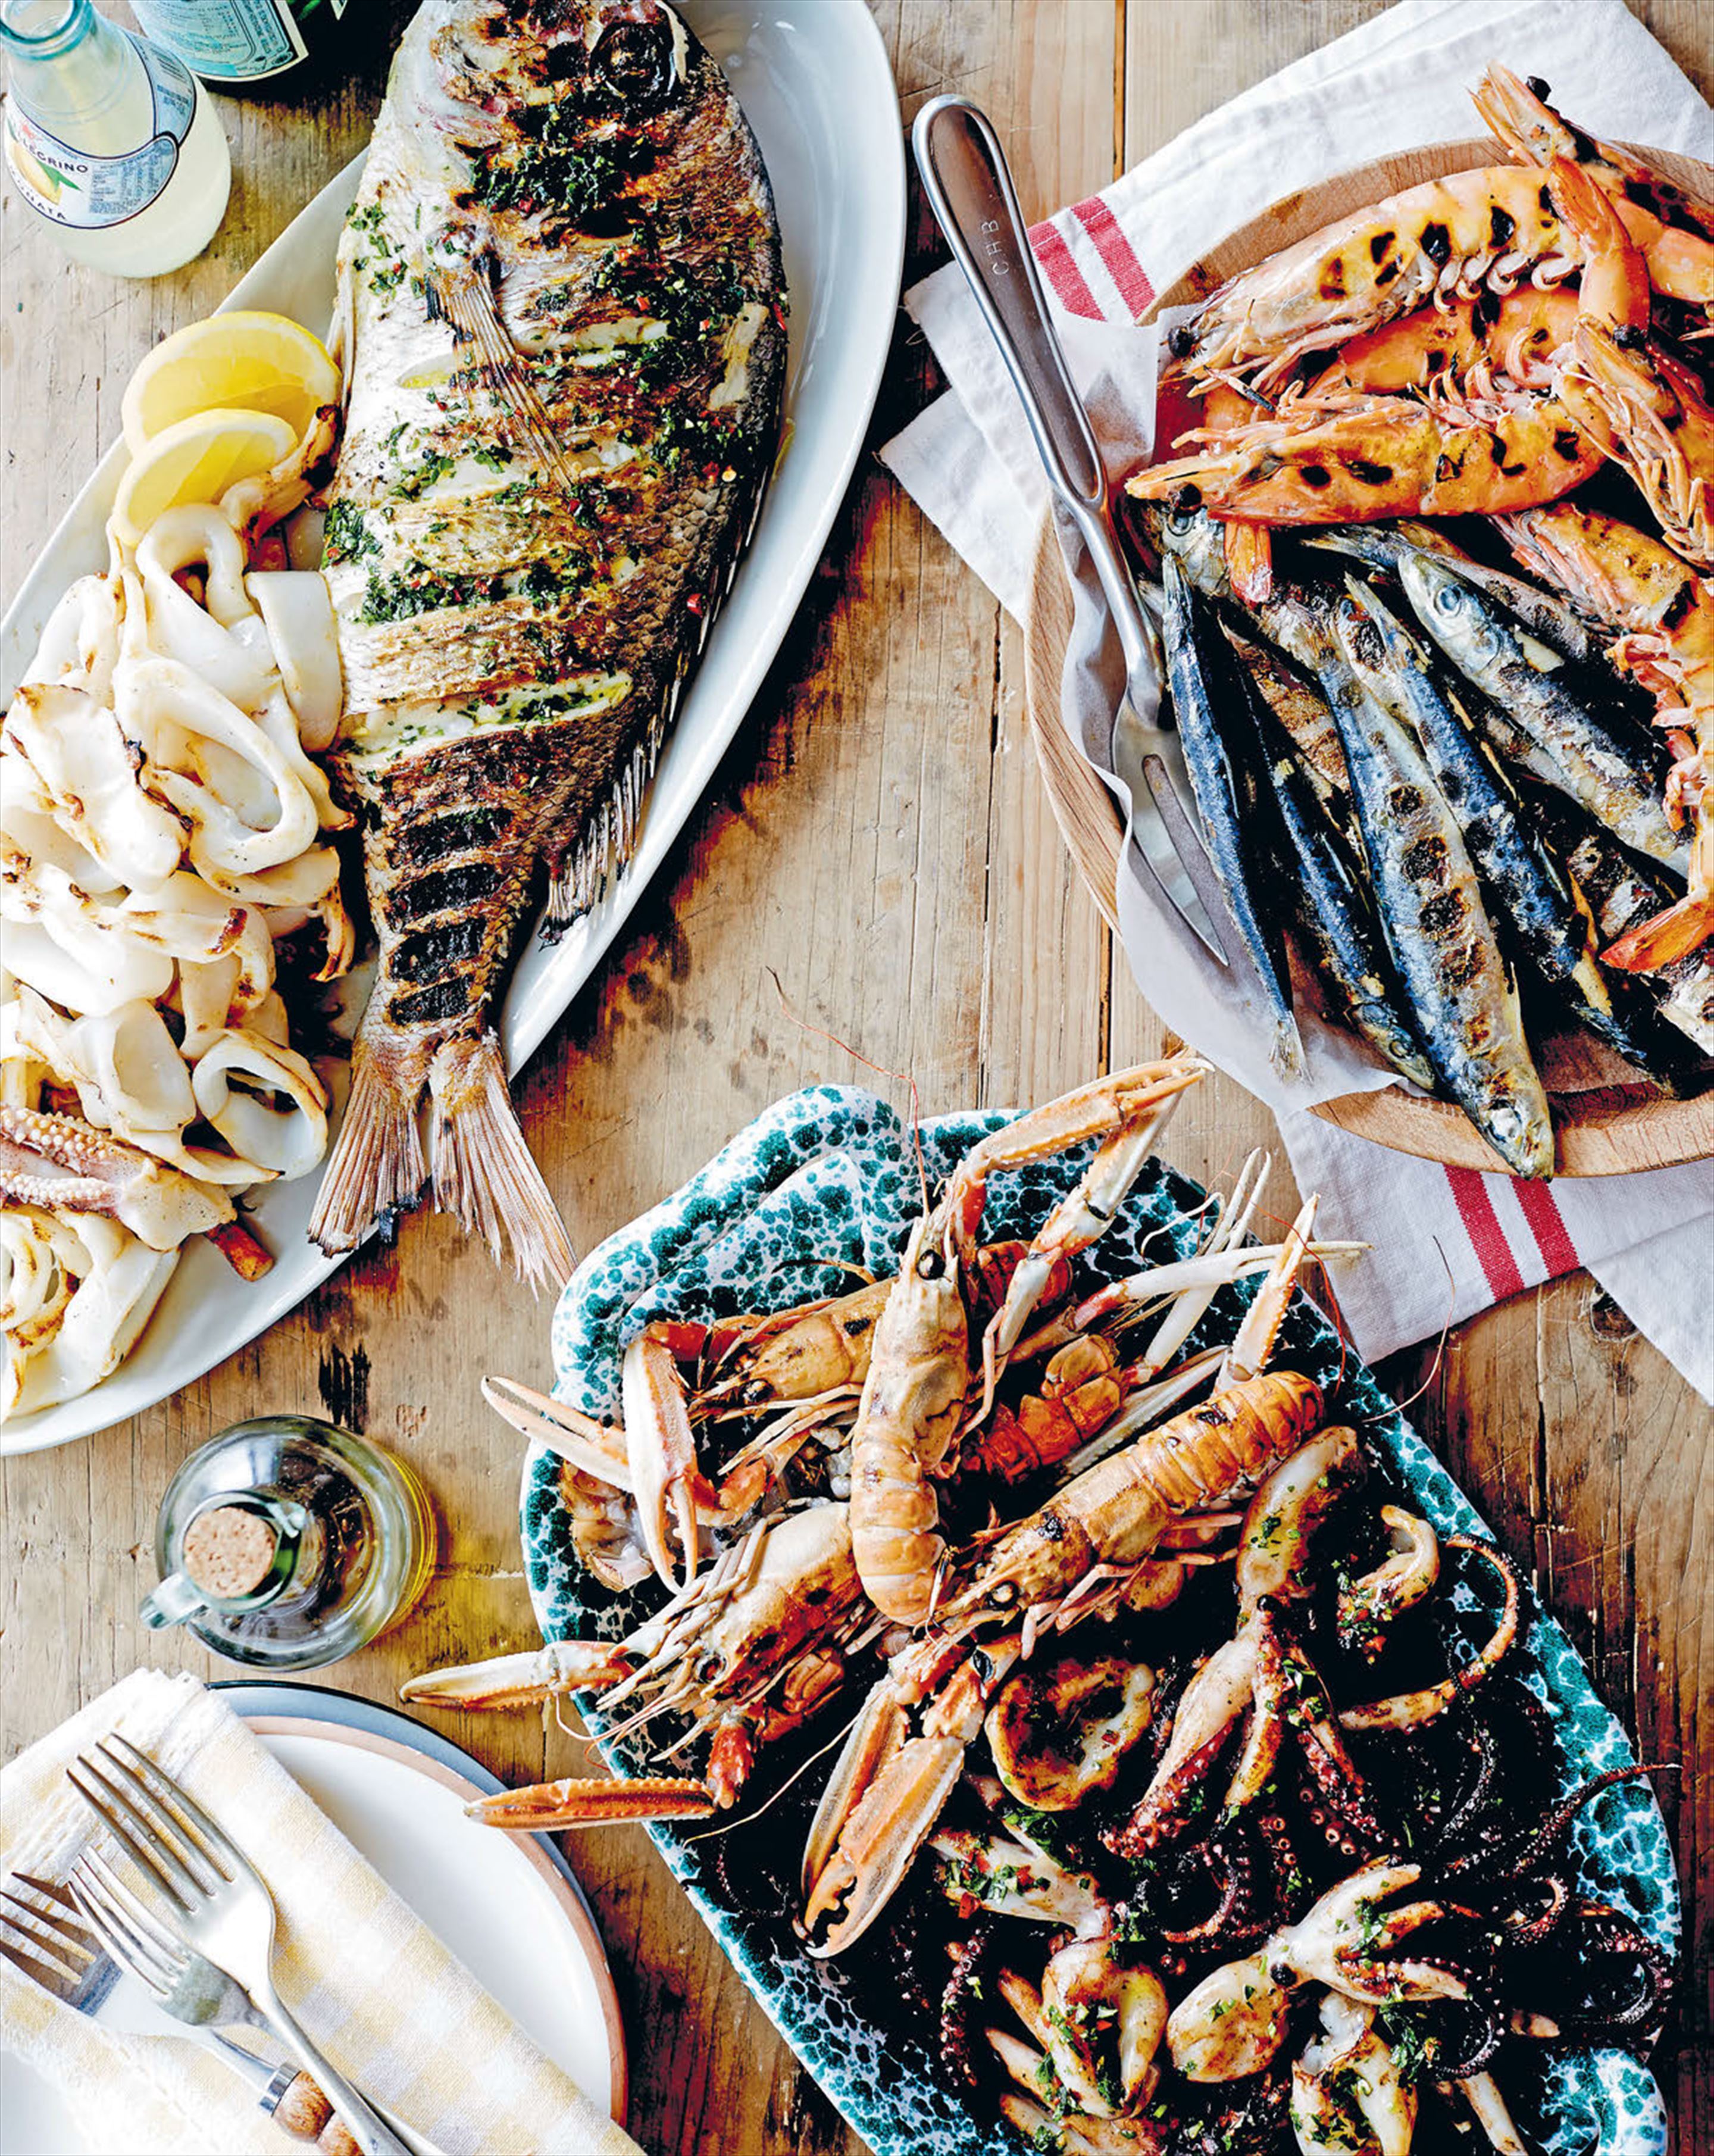 Fire-grilled fish and seafood